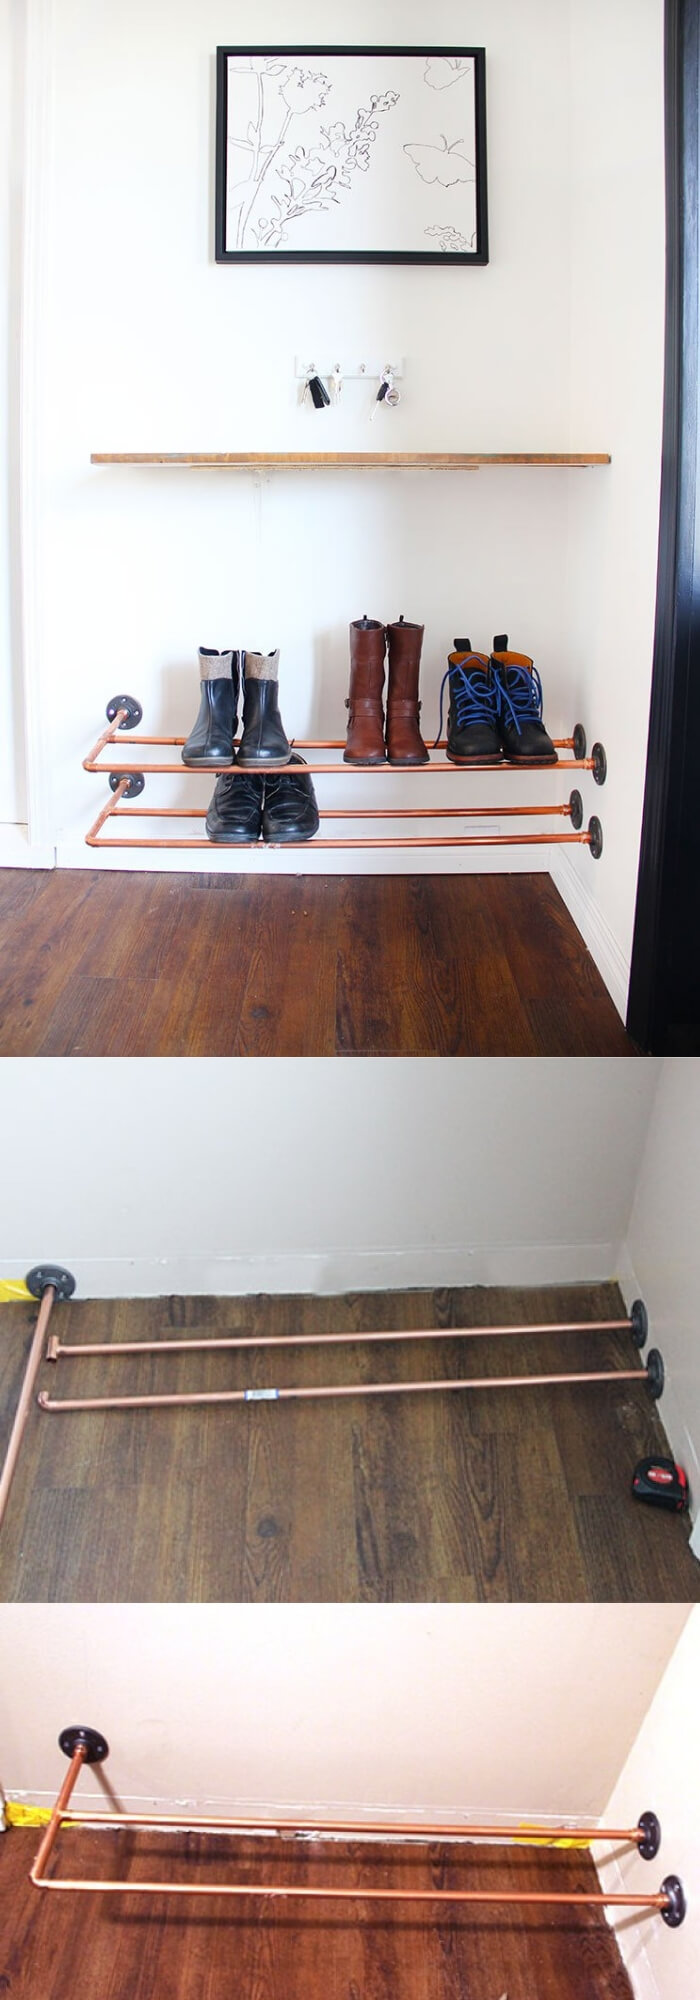 Copper Shoe Rack | Smart Shoe Storage Ideas & Designs For Any Zoom Size